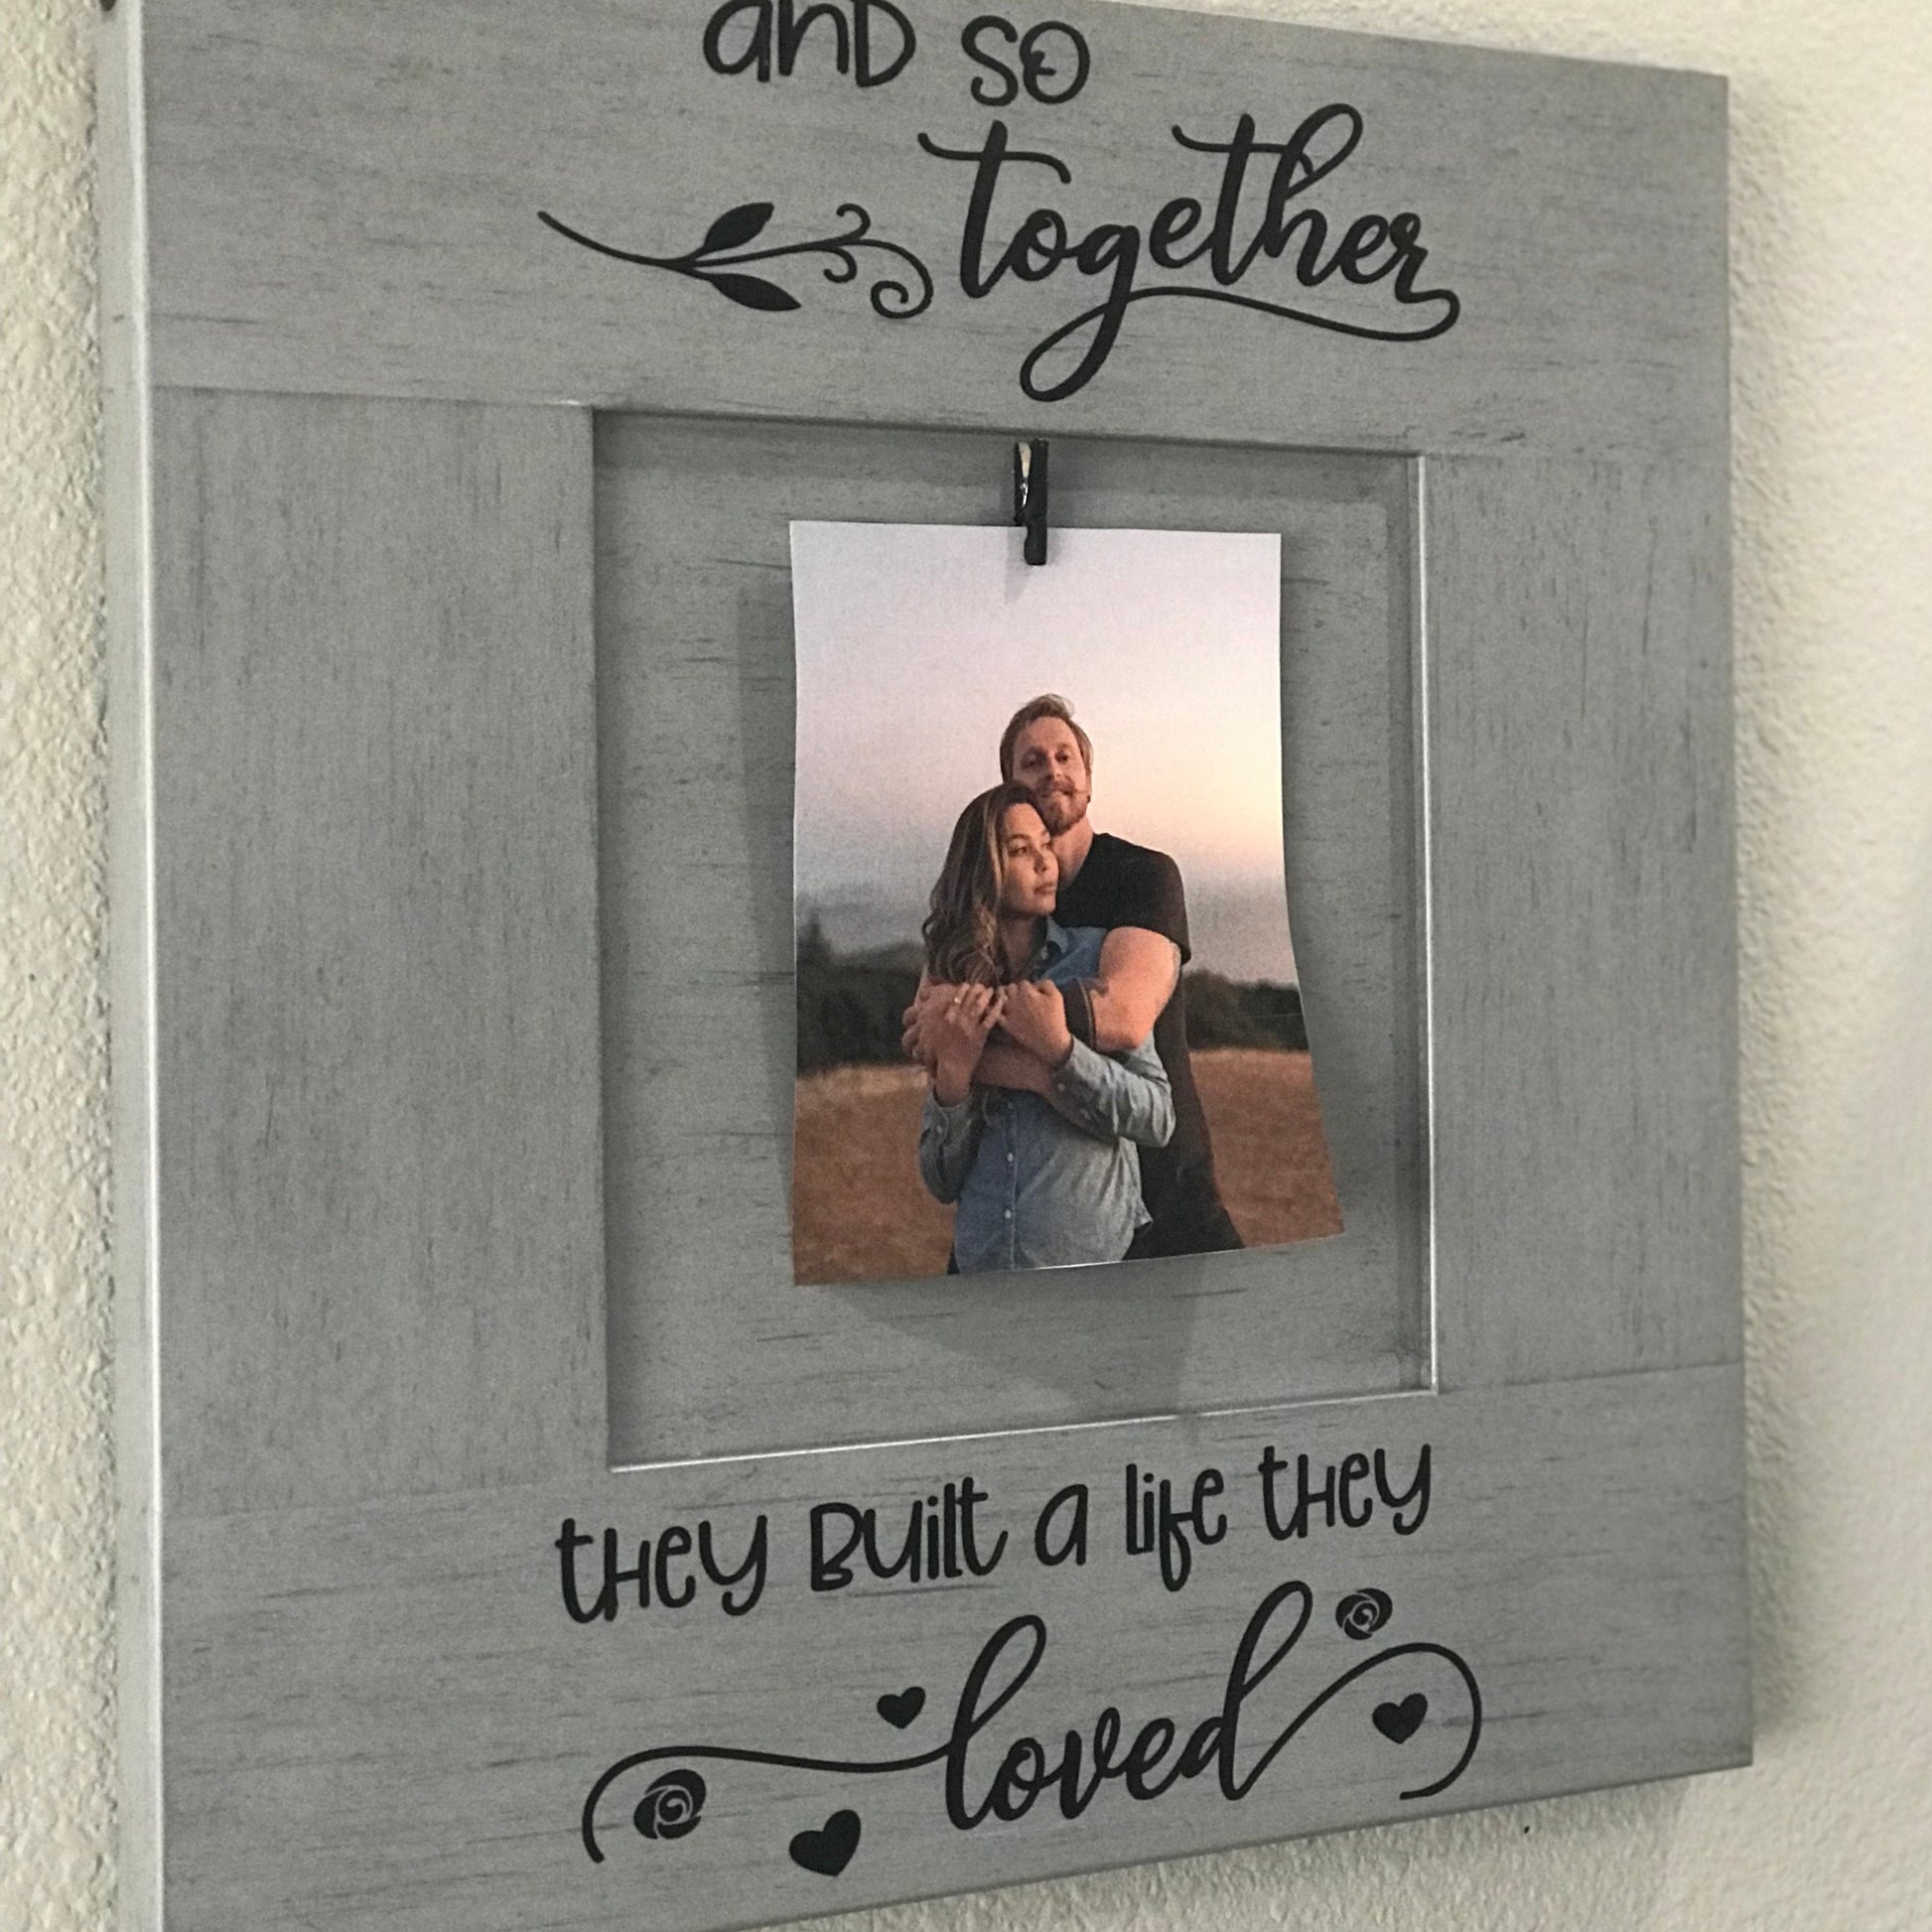 repurposed cabinet door, sign, together they built a life they loved, picture holder